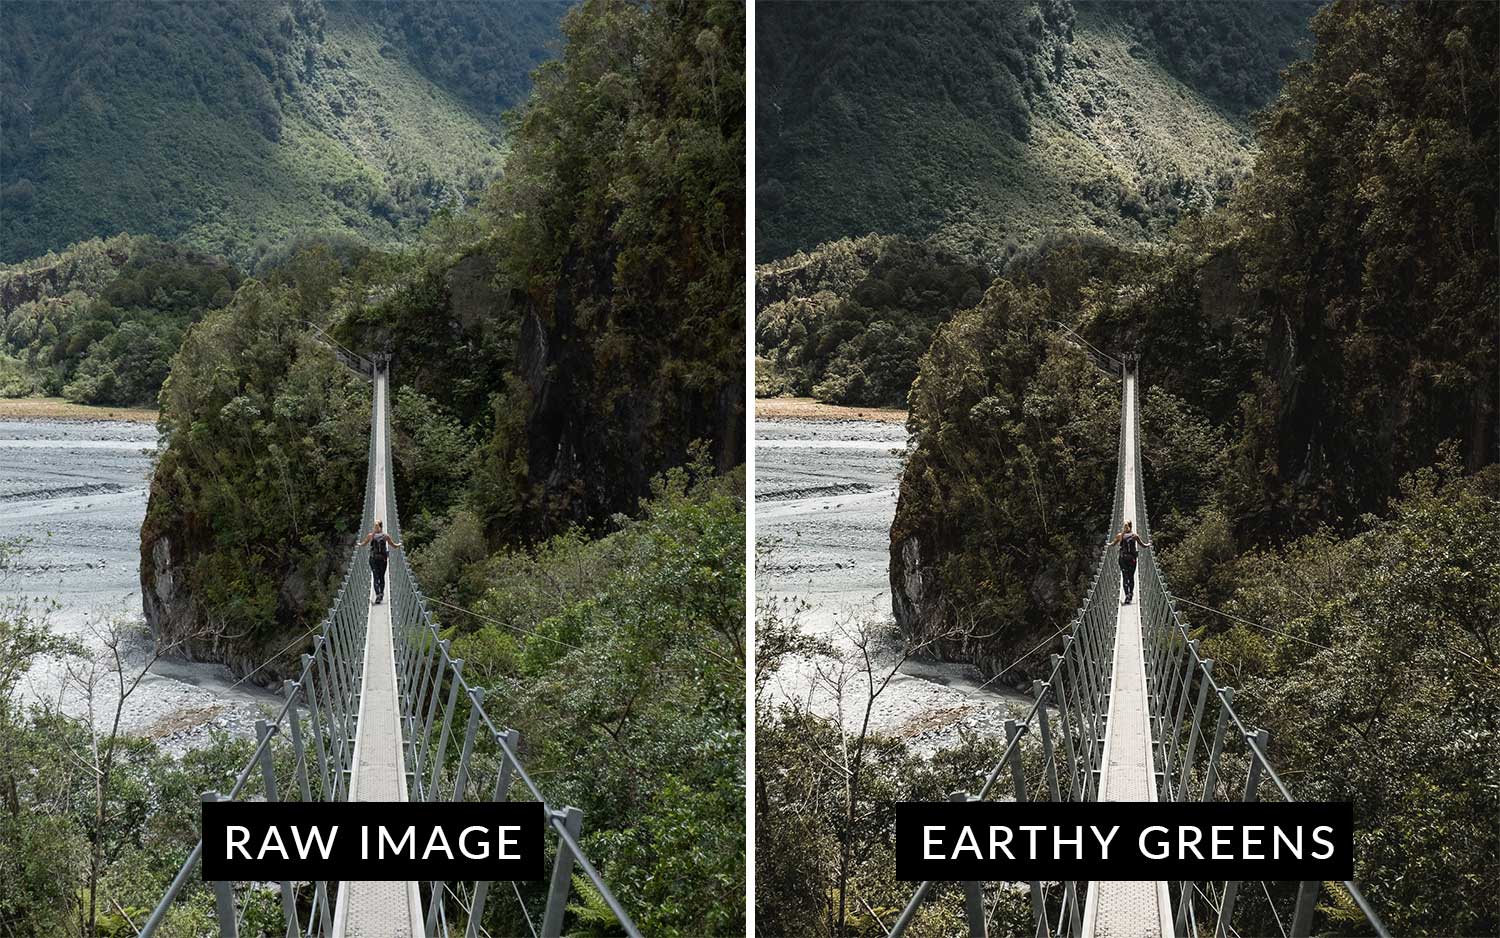 A before and after comparison showing the Earthy Greens preset which is included in this moody Lightroom presets package.